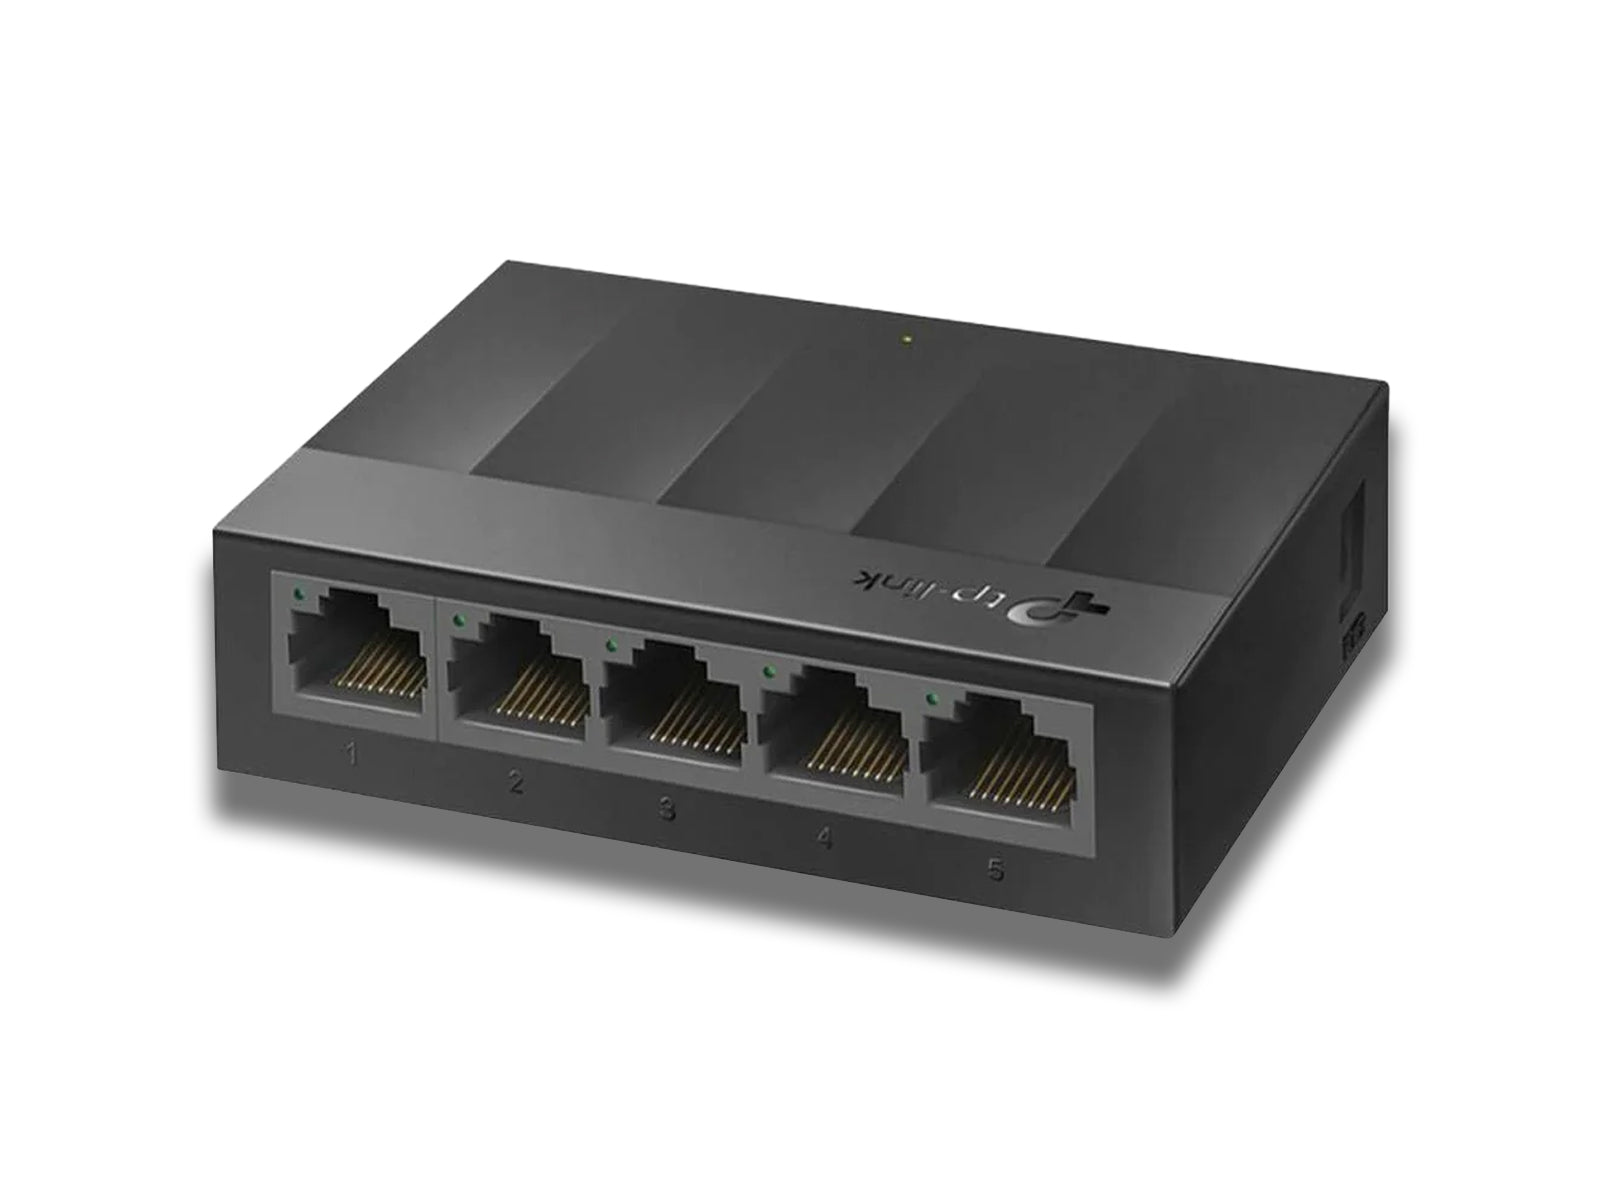  5 Port Gigabit Unmanaged Network Switch Box Back View